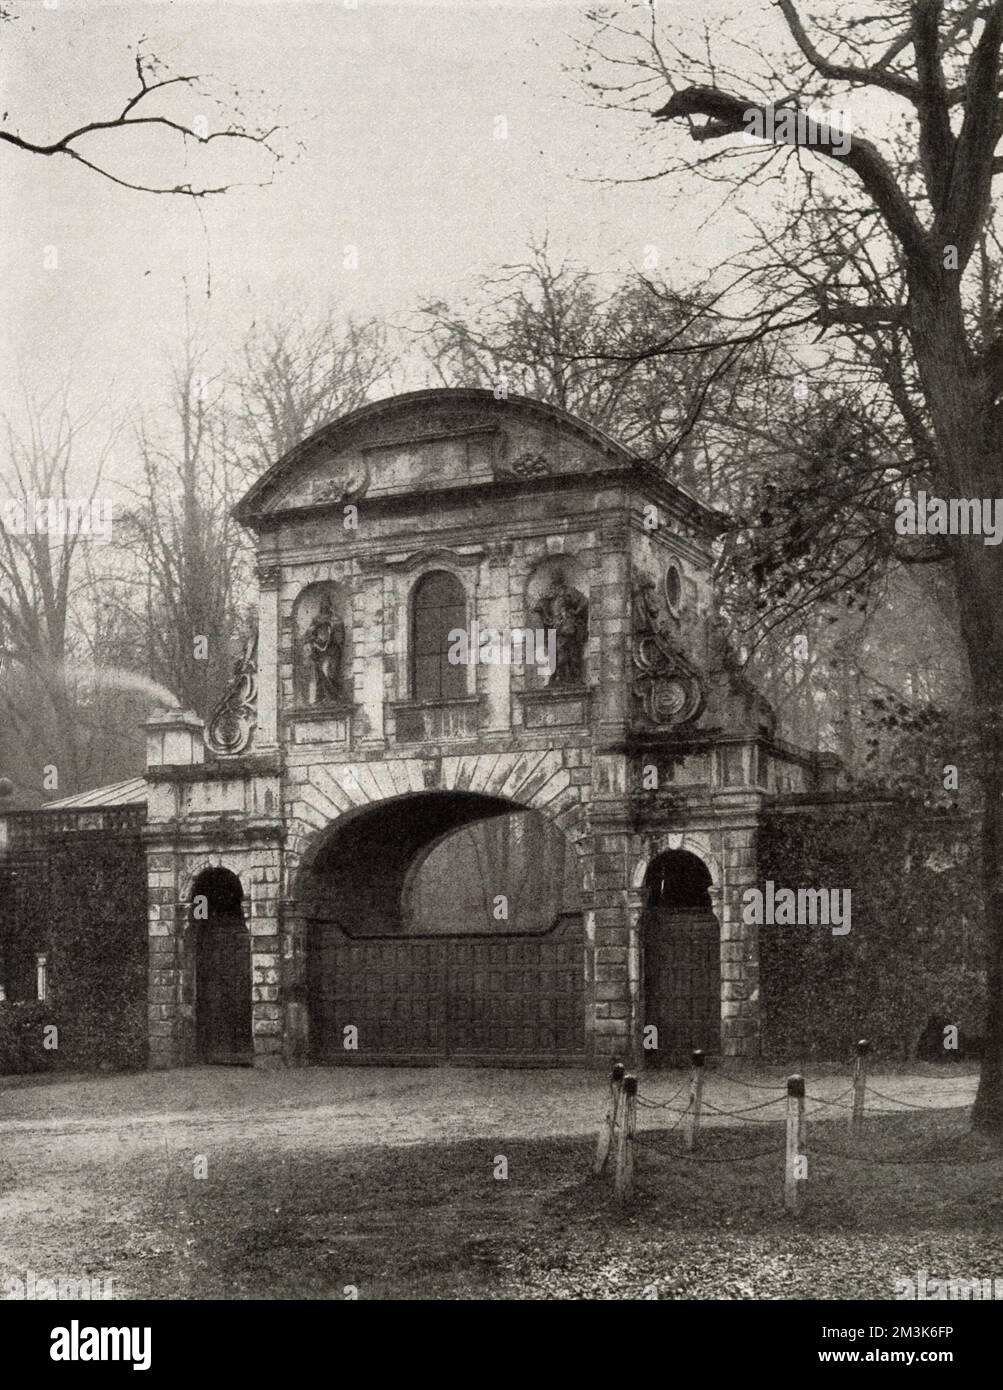 Temple Bar at Theobald's Park. The Temple Bar had stood in Fleet Street, London, but was pulled down in 1878 and rebuilt in Waltham Cross. Later in 2004 it will return to London and be rebuilt at Paternoster Square near to St. Paul's Cathedral. Stock Photo